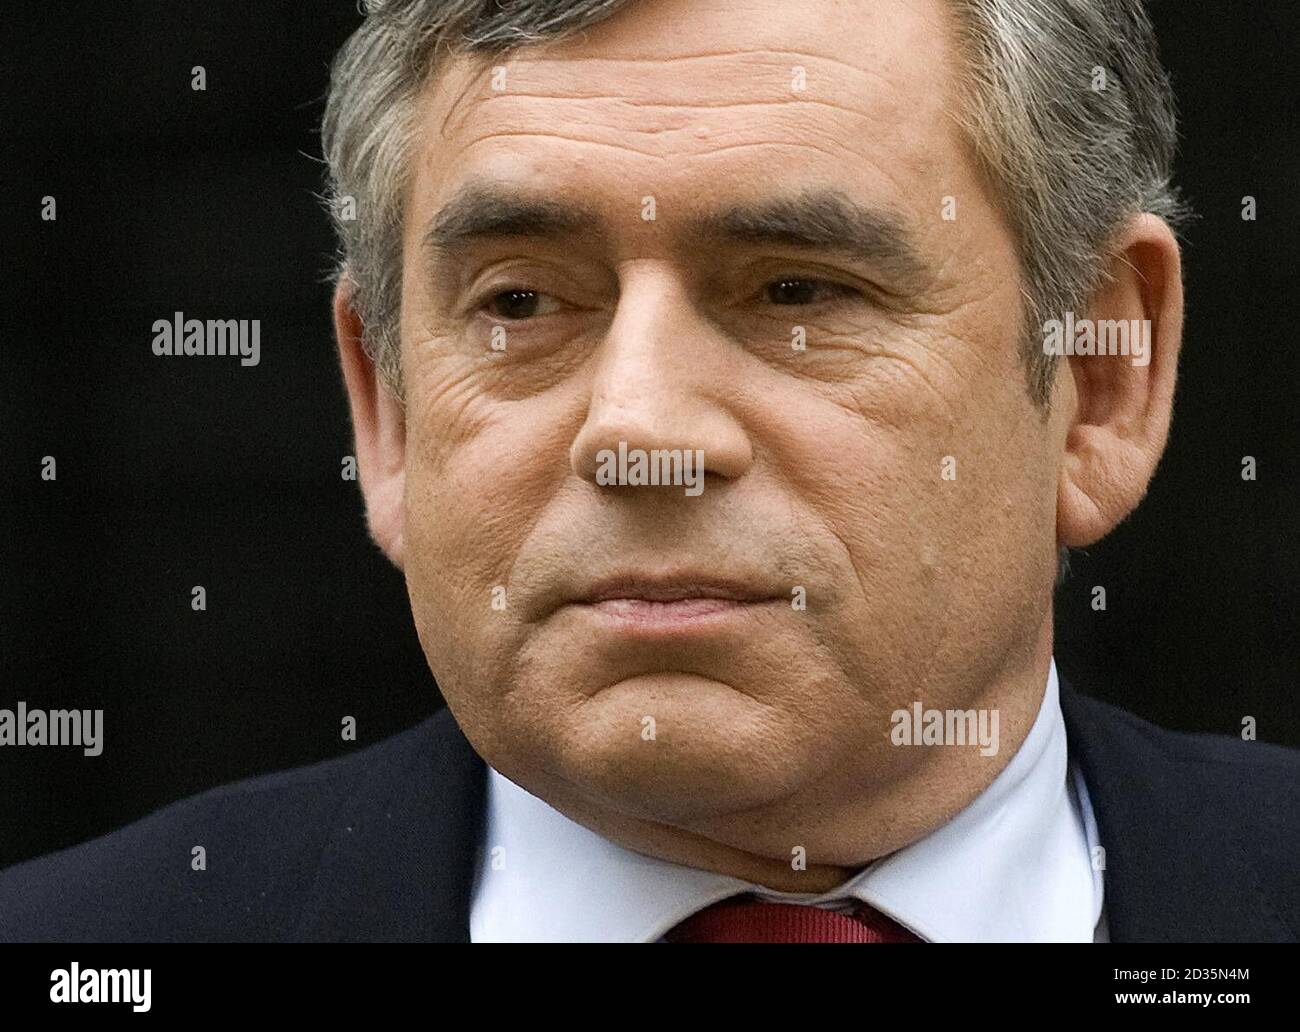 Prime Minister Gordon Brown returns to Downing Street with the polls pointing to a hung parliament and no party having an overall majority after the 2010 General Election. Stock Photo